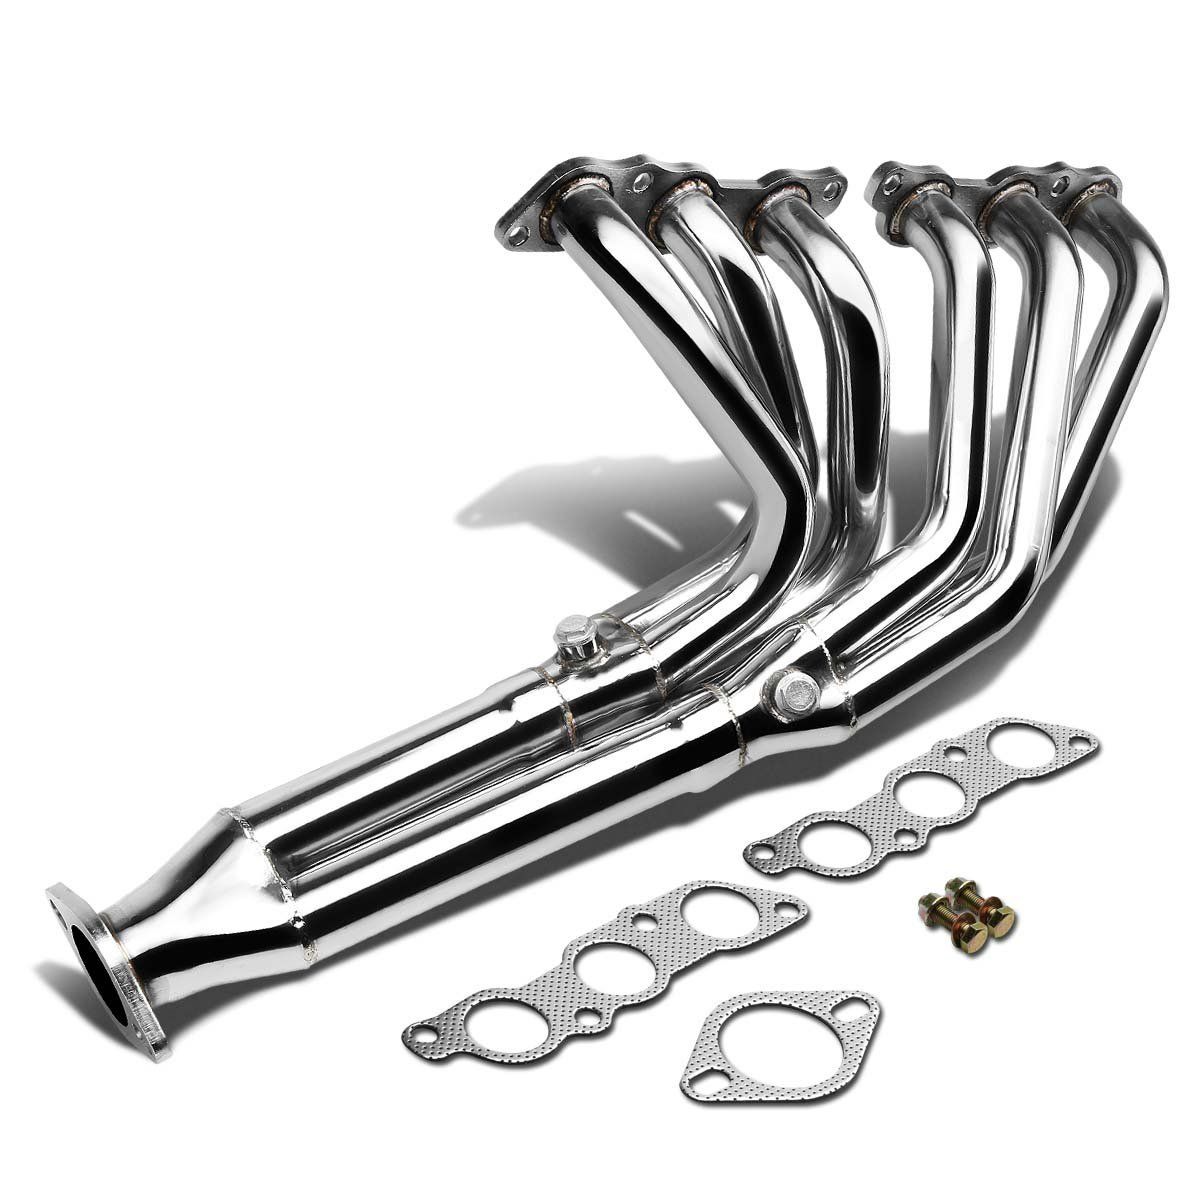 ODM Egr Automotive Supplier –  Stainless Racing Header Manifold Exhaust header Fits For 93-98 Toyota Supra MK4 NA 3.0L – Yibai